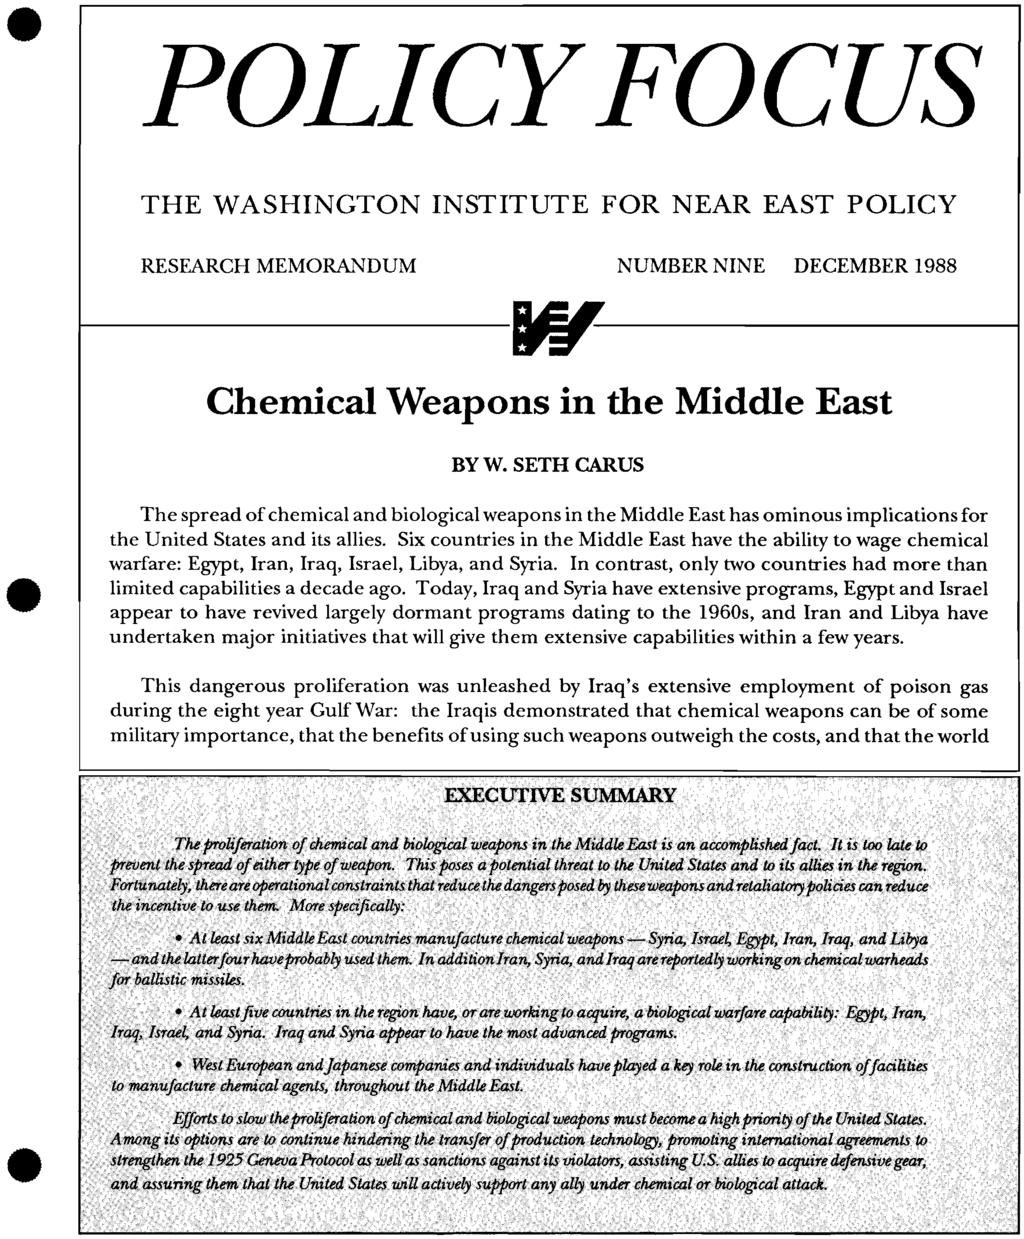 POLICYFOCUS THE WASHINGTON INSTITUTE FOR NEAR EAST POLICY RESEARCH MEMORANDUM NUMBER NINE DECEMBER 1988 W Chemical Weapons in the Middle East BYW.